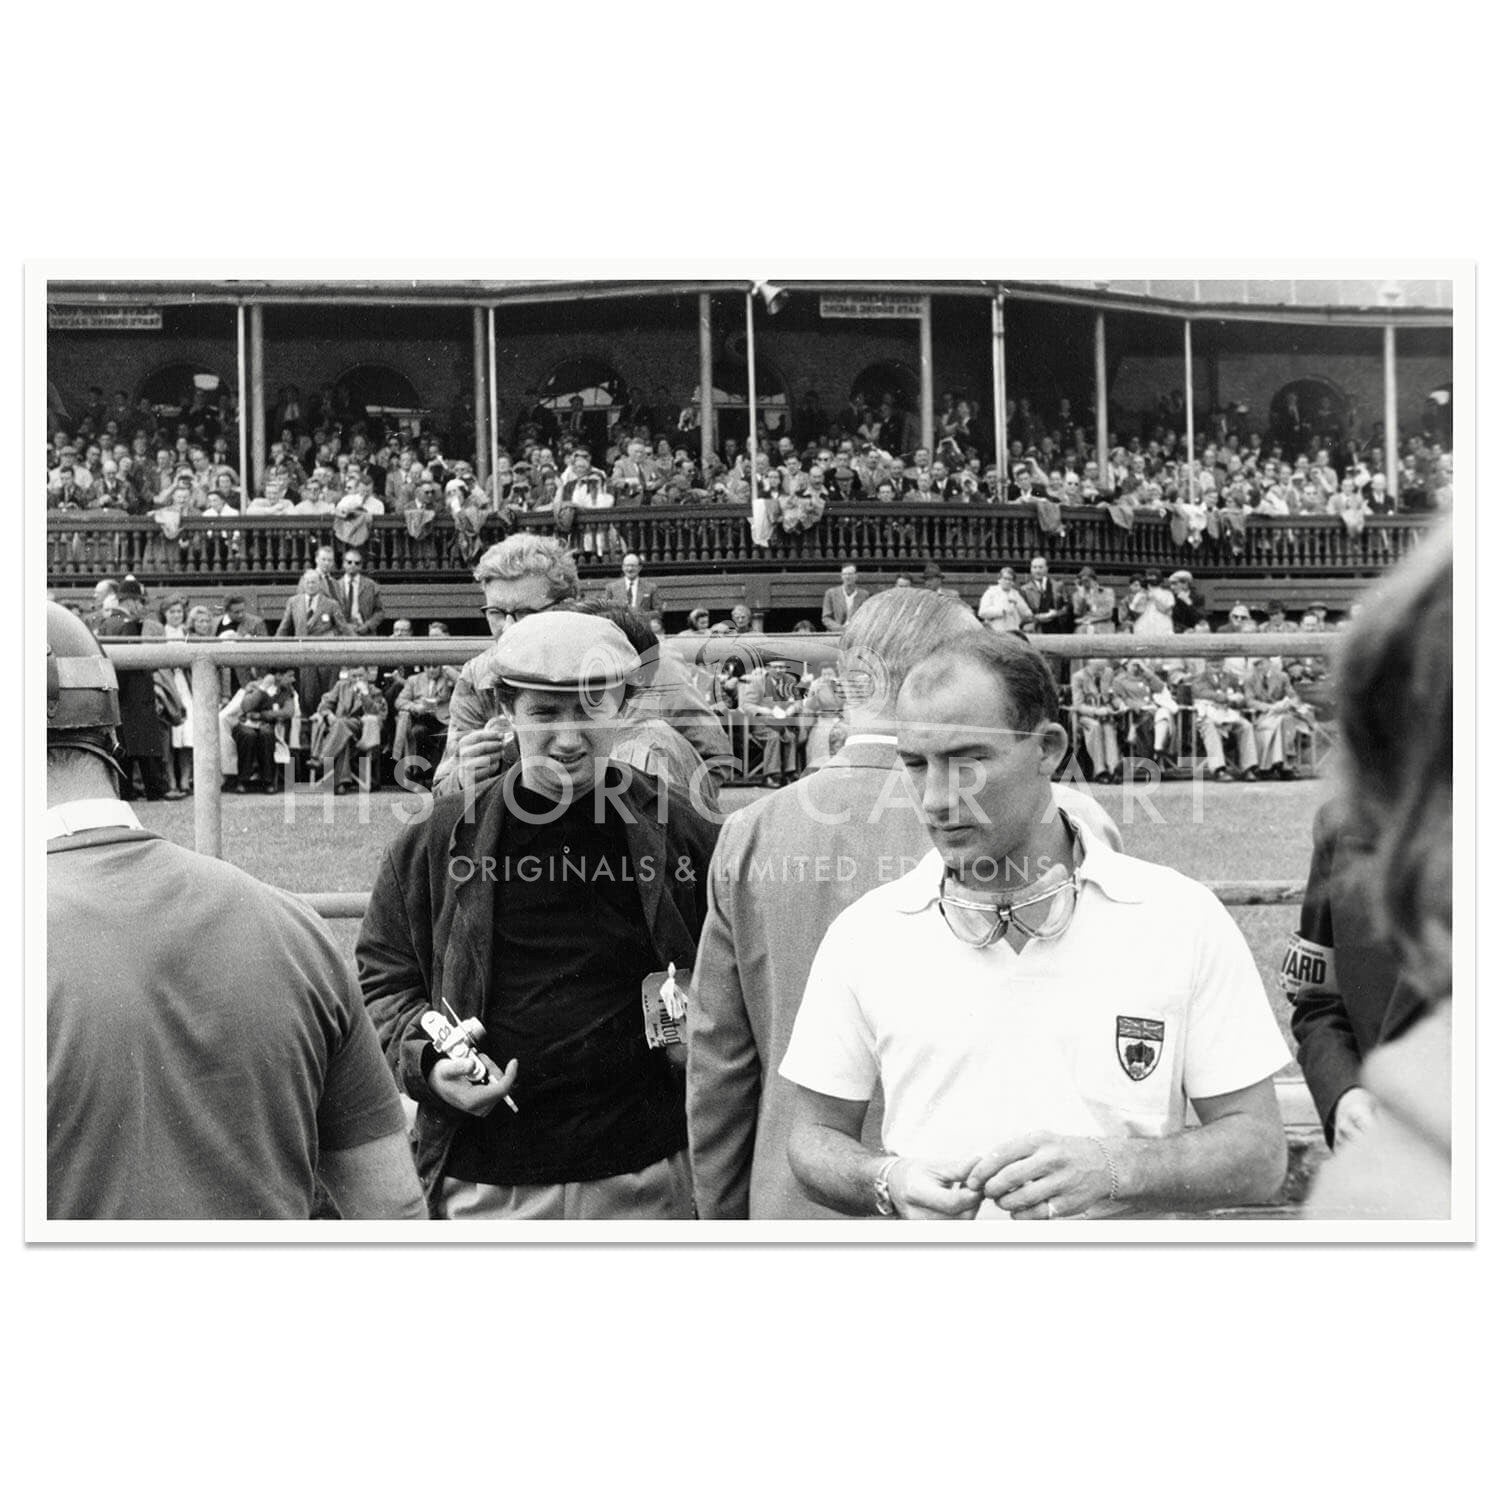 1957 British Grand Prix | Aintree | Stirling Moss before the start | Photograph